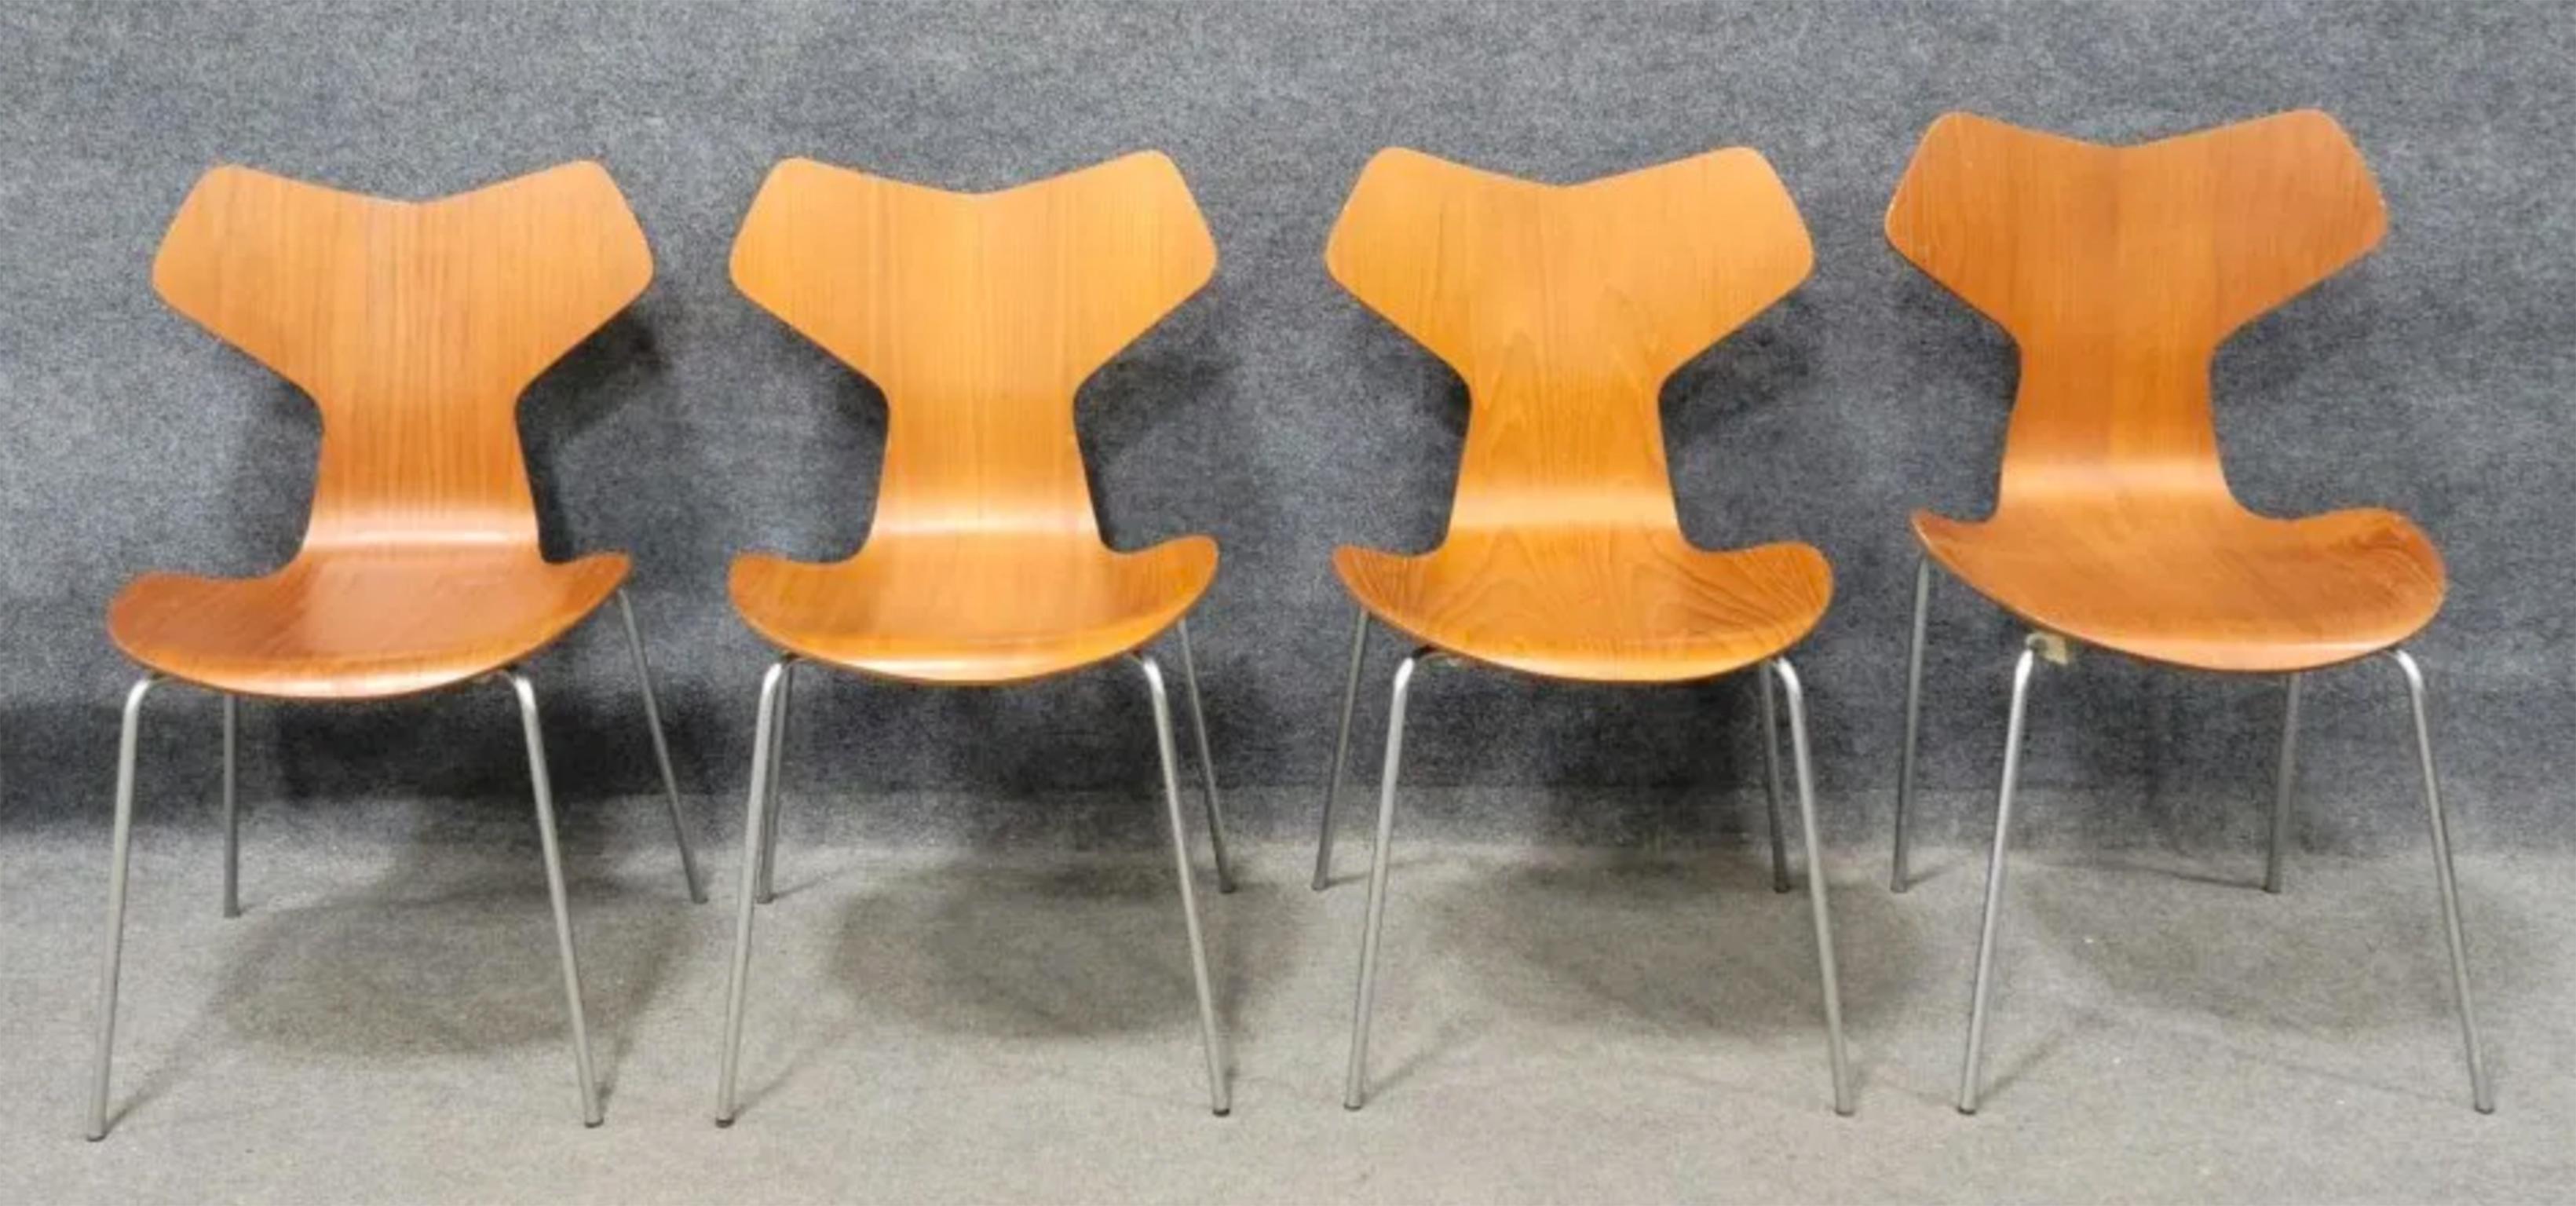 Set of 4 Danish Grand Prix 3130 Chair by Arne Jacobsen for Fritz Hansen in teak wood with chrome base. Labeled on bottom. Clean chairs. Located in Brooklyn NYC.